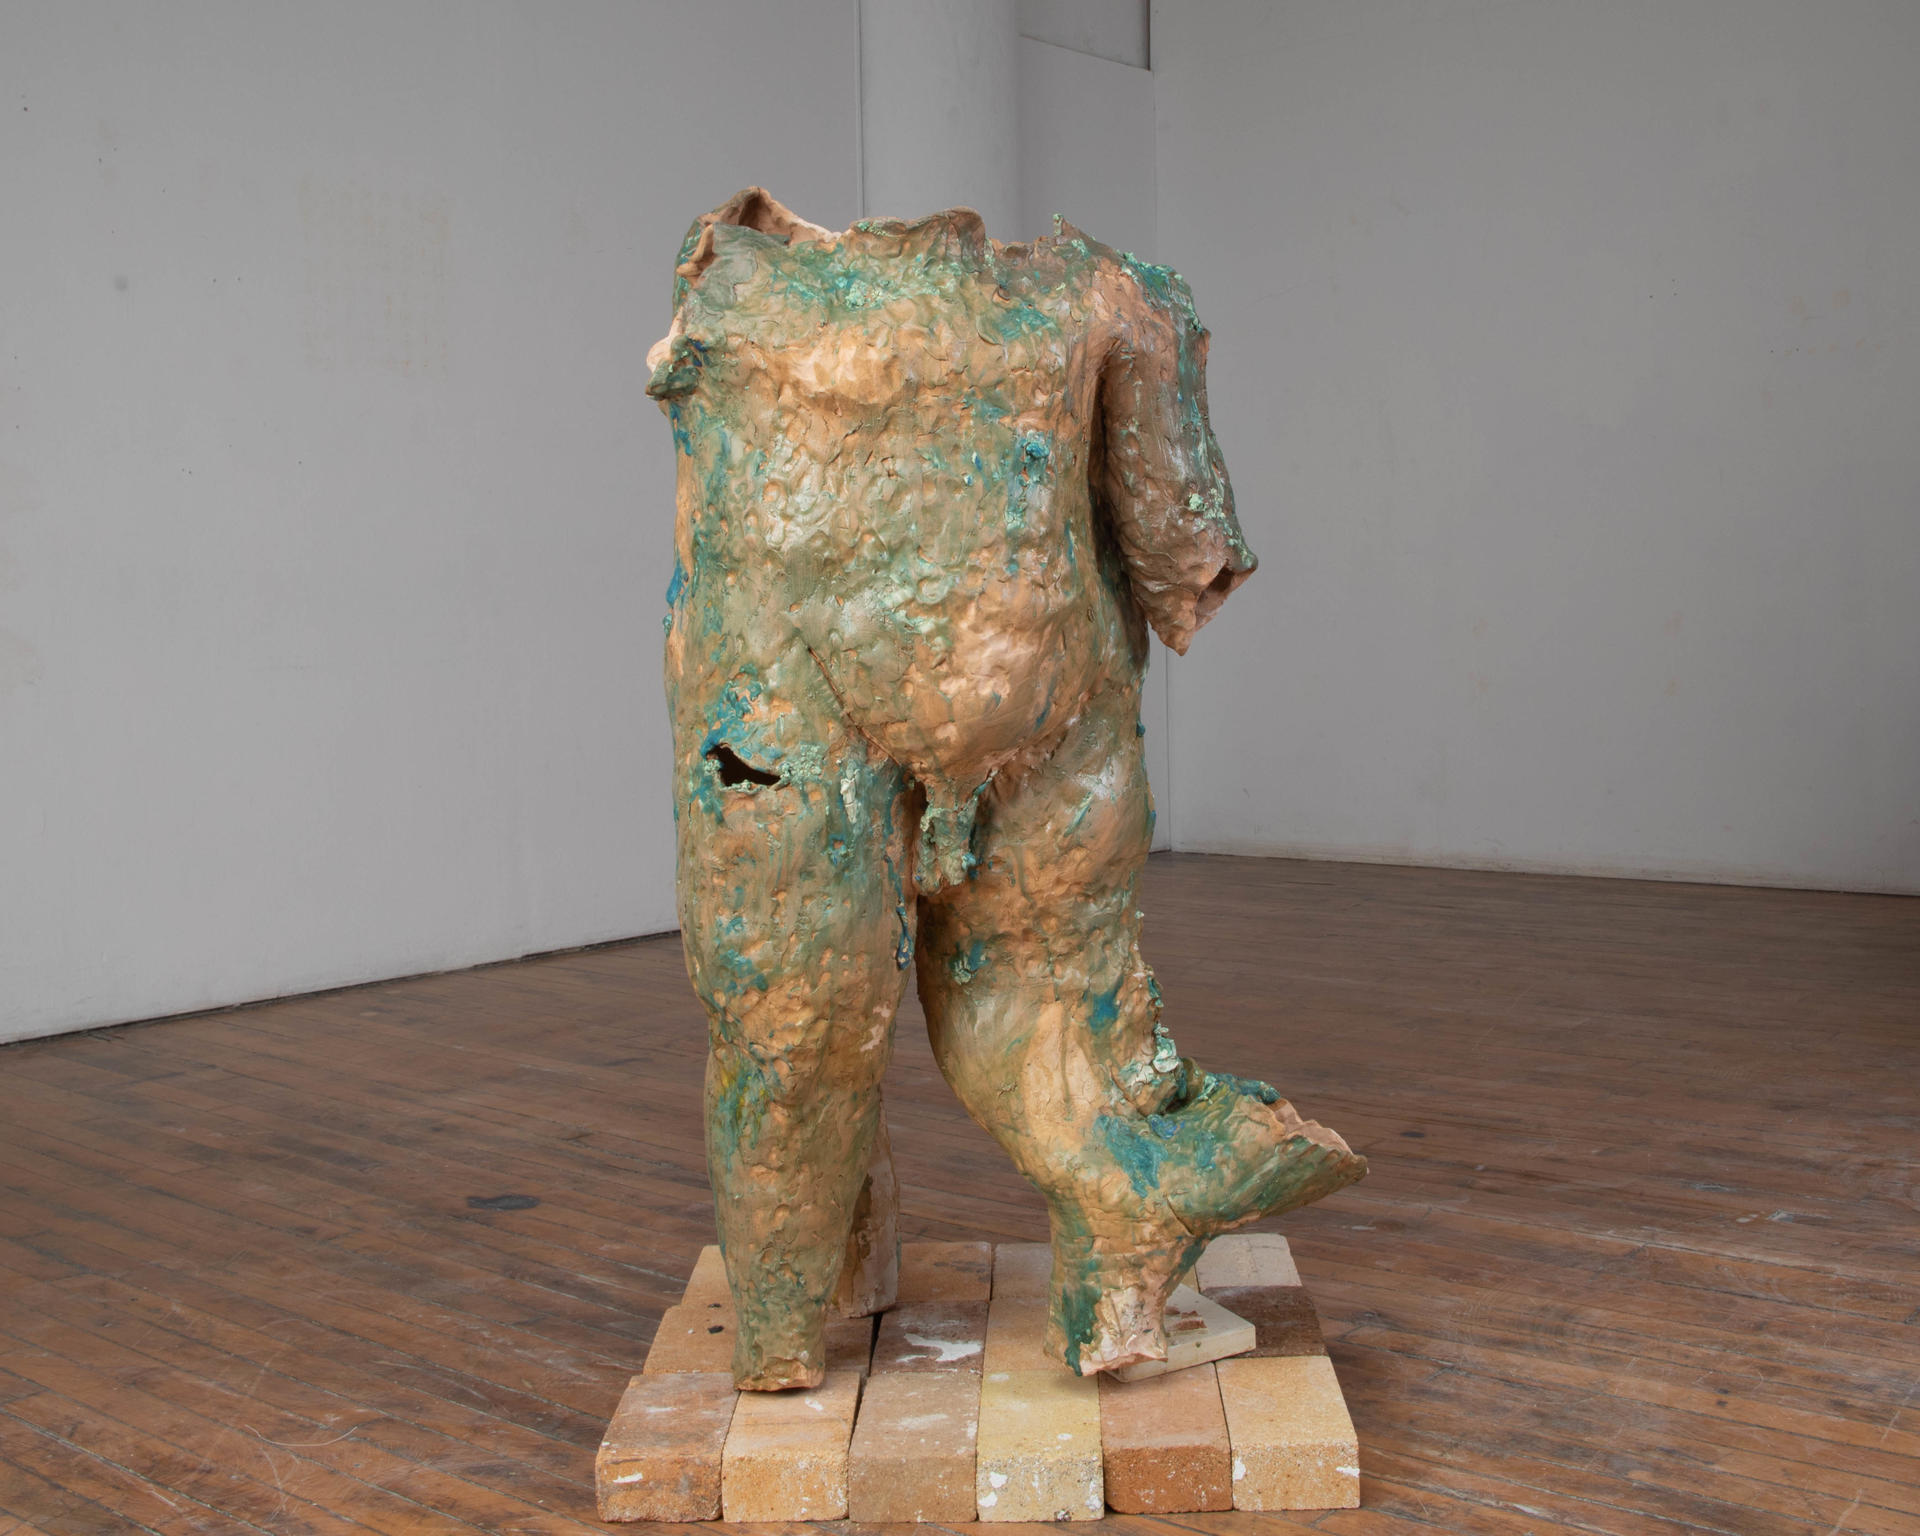 An enlarged and abject, hollow, ceramic body standing on top a small plinth of bricks